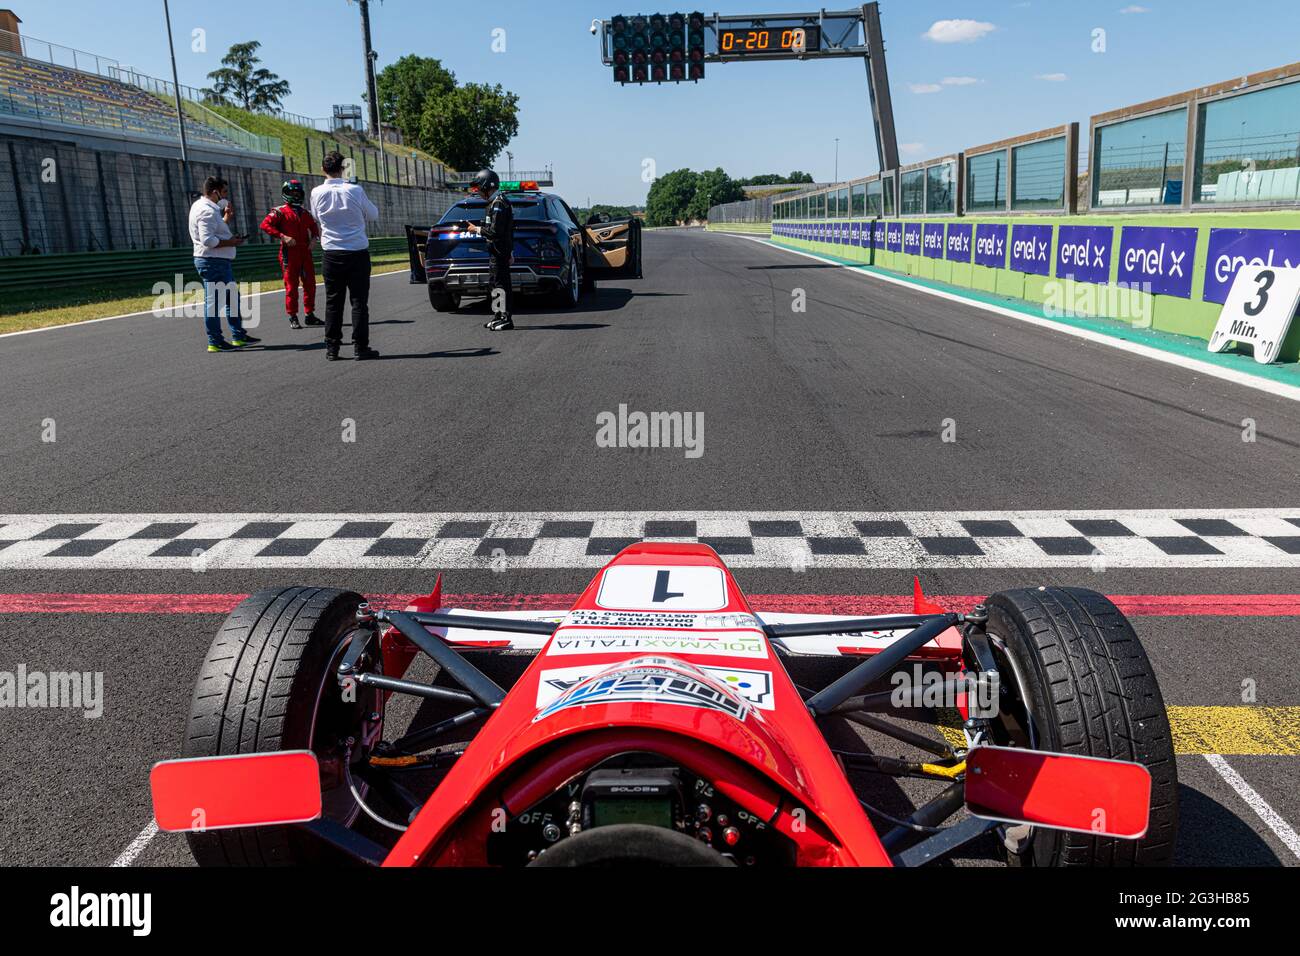 Vallelunga June 13 2021, Fx series racing. Empty asphalt circuit track from racing car driver point of view, concept of fast start from pole position Stock Photo